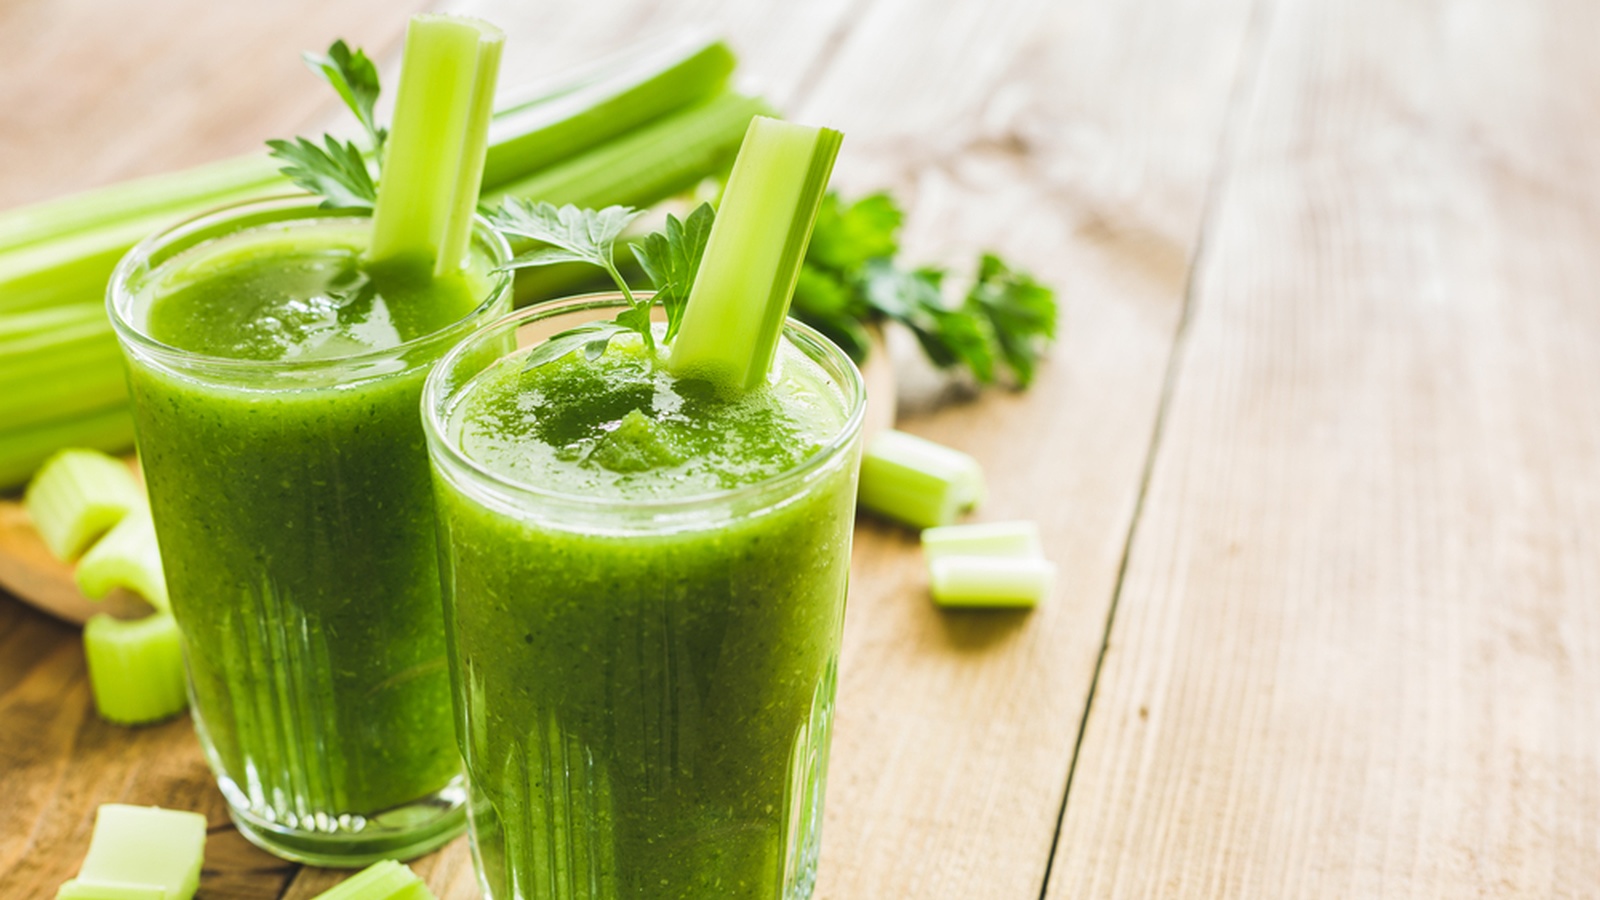 How to Cleanse and Nourish Your Cells with Fresh Vegetable Juices